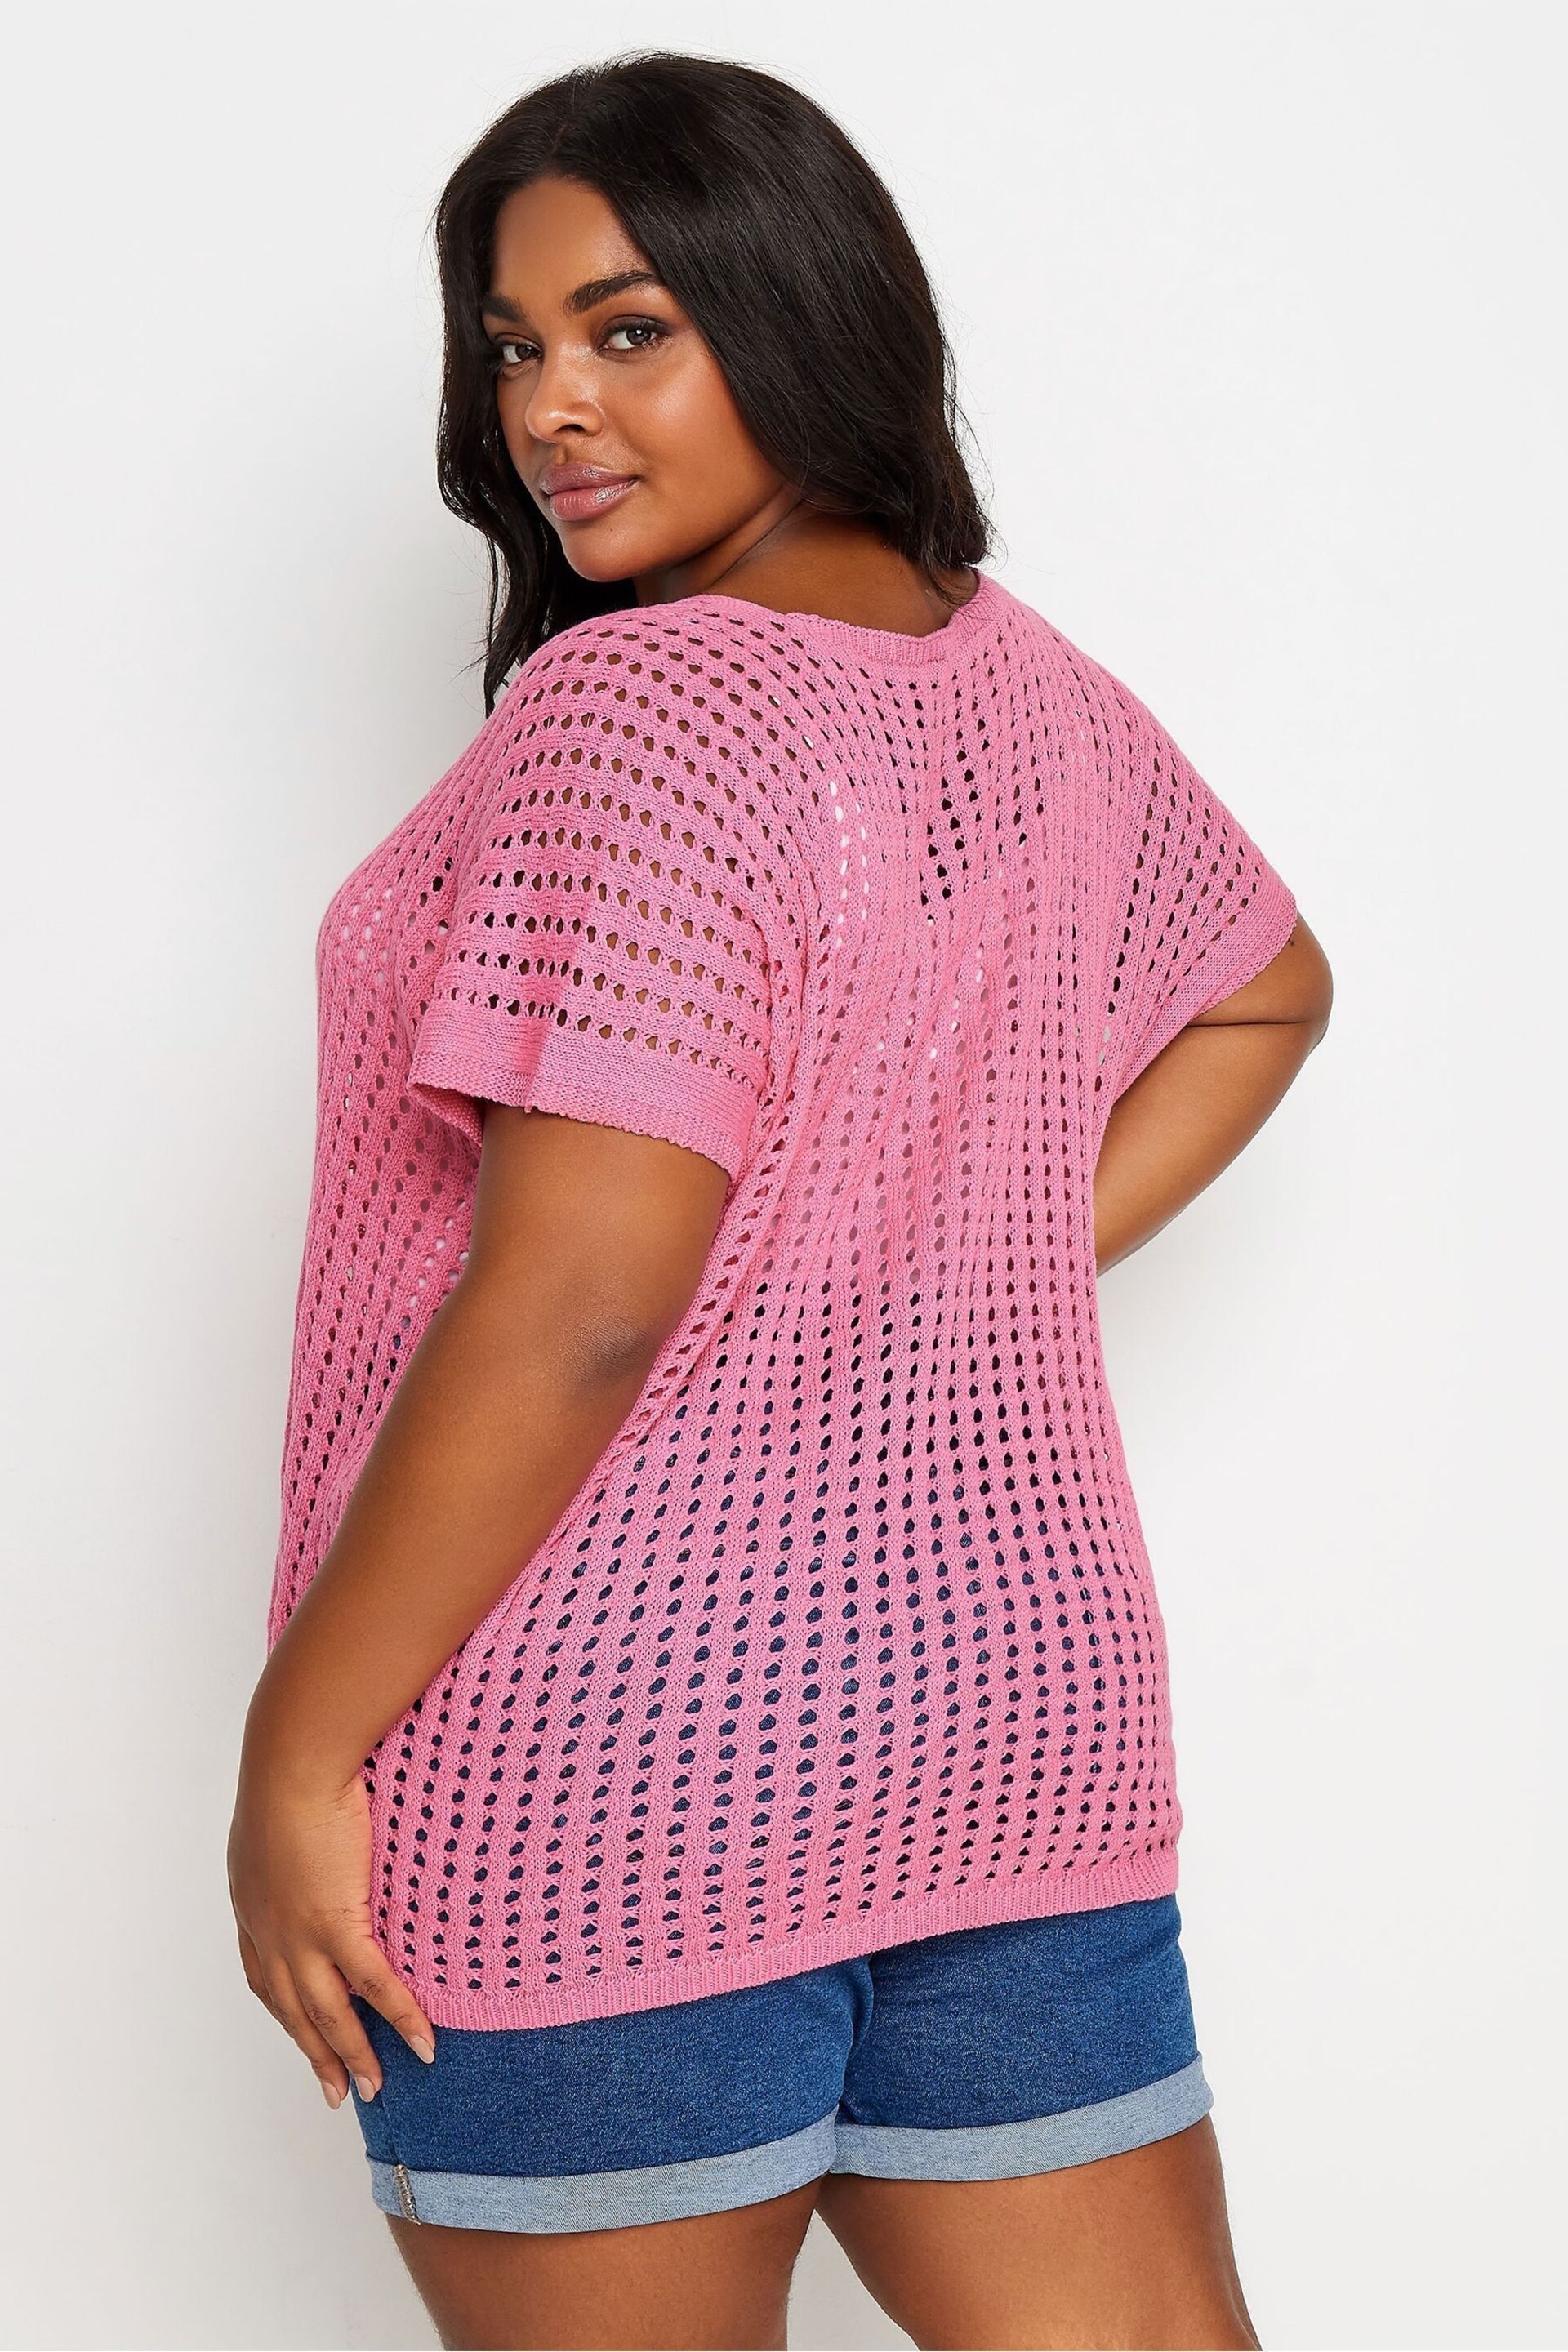 Pink YOURS Curve Pink Boxy Crochet Top - Image 3 of 5